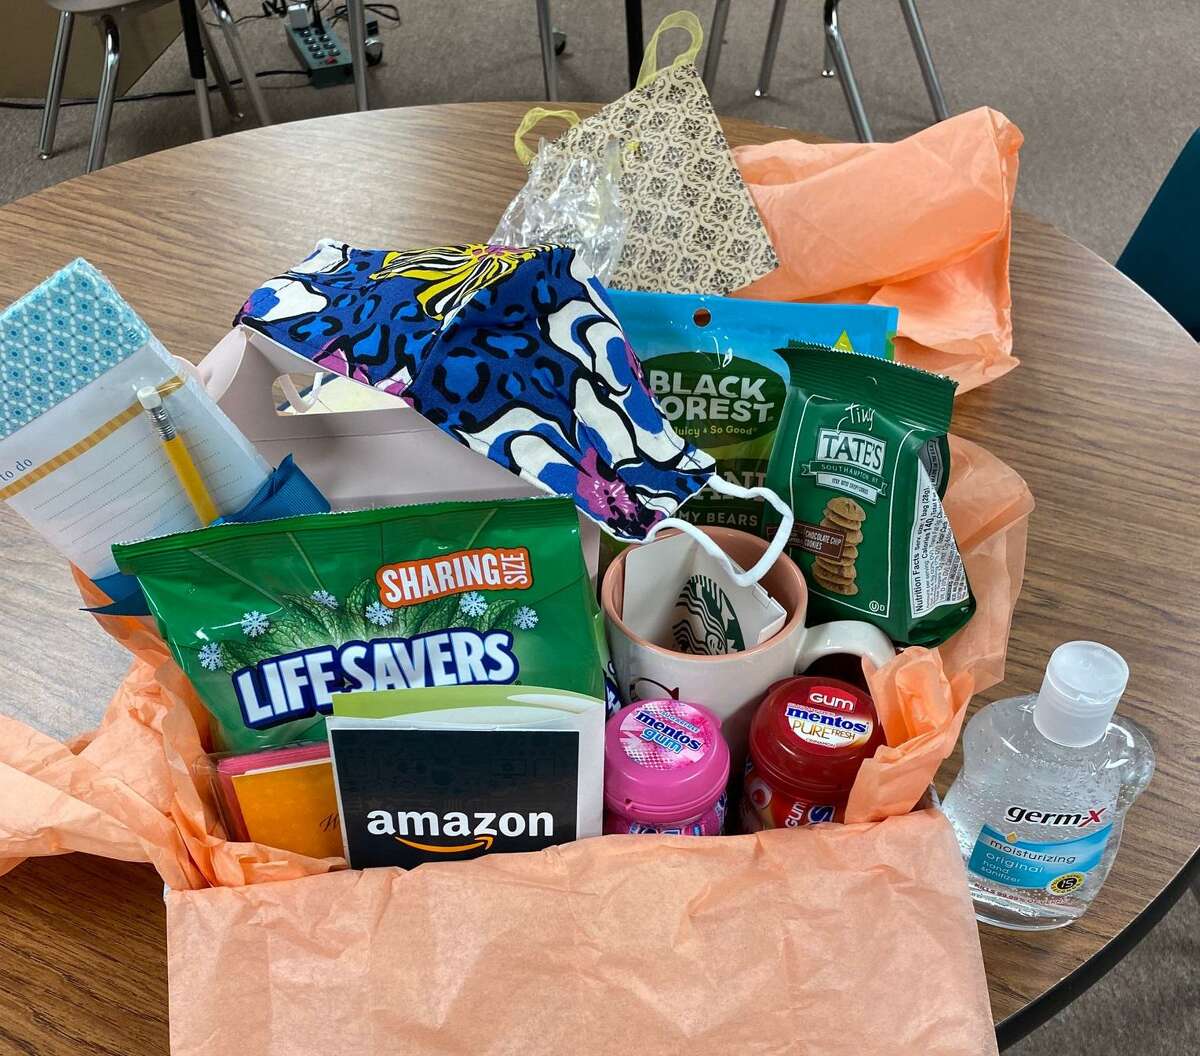 Sofia Yousef, a resource/in-class support paraprofessional at Bear Creek Elementary School, received this box filled with goodies from Dori Morgan, her Adopt a Katy ISD Teacher 2020-21 adopter, to brighten the start of her school year. So far the Facebook group has matched nearly 1,800 educators with members of the community.